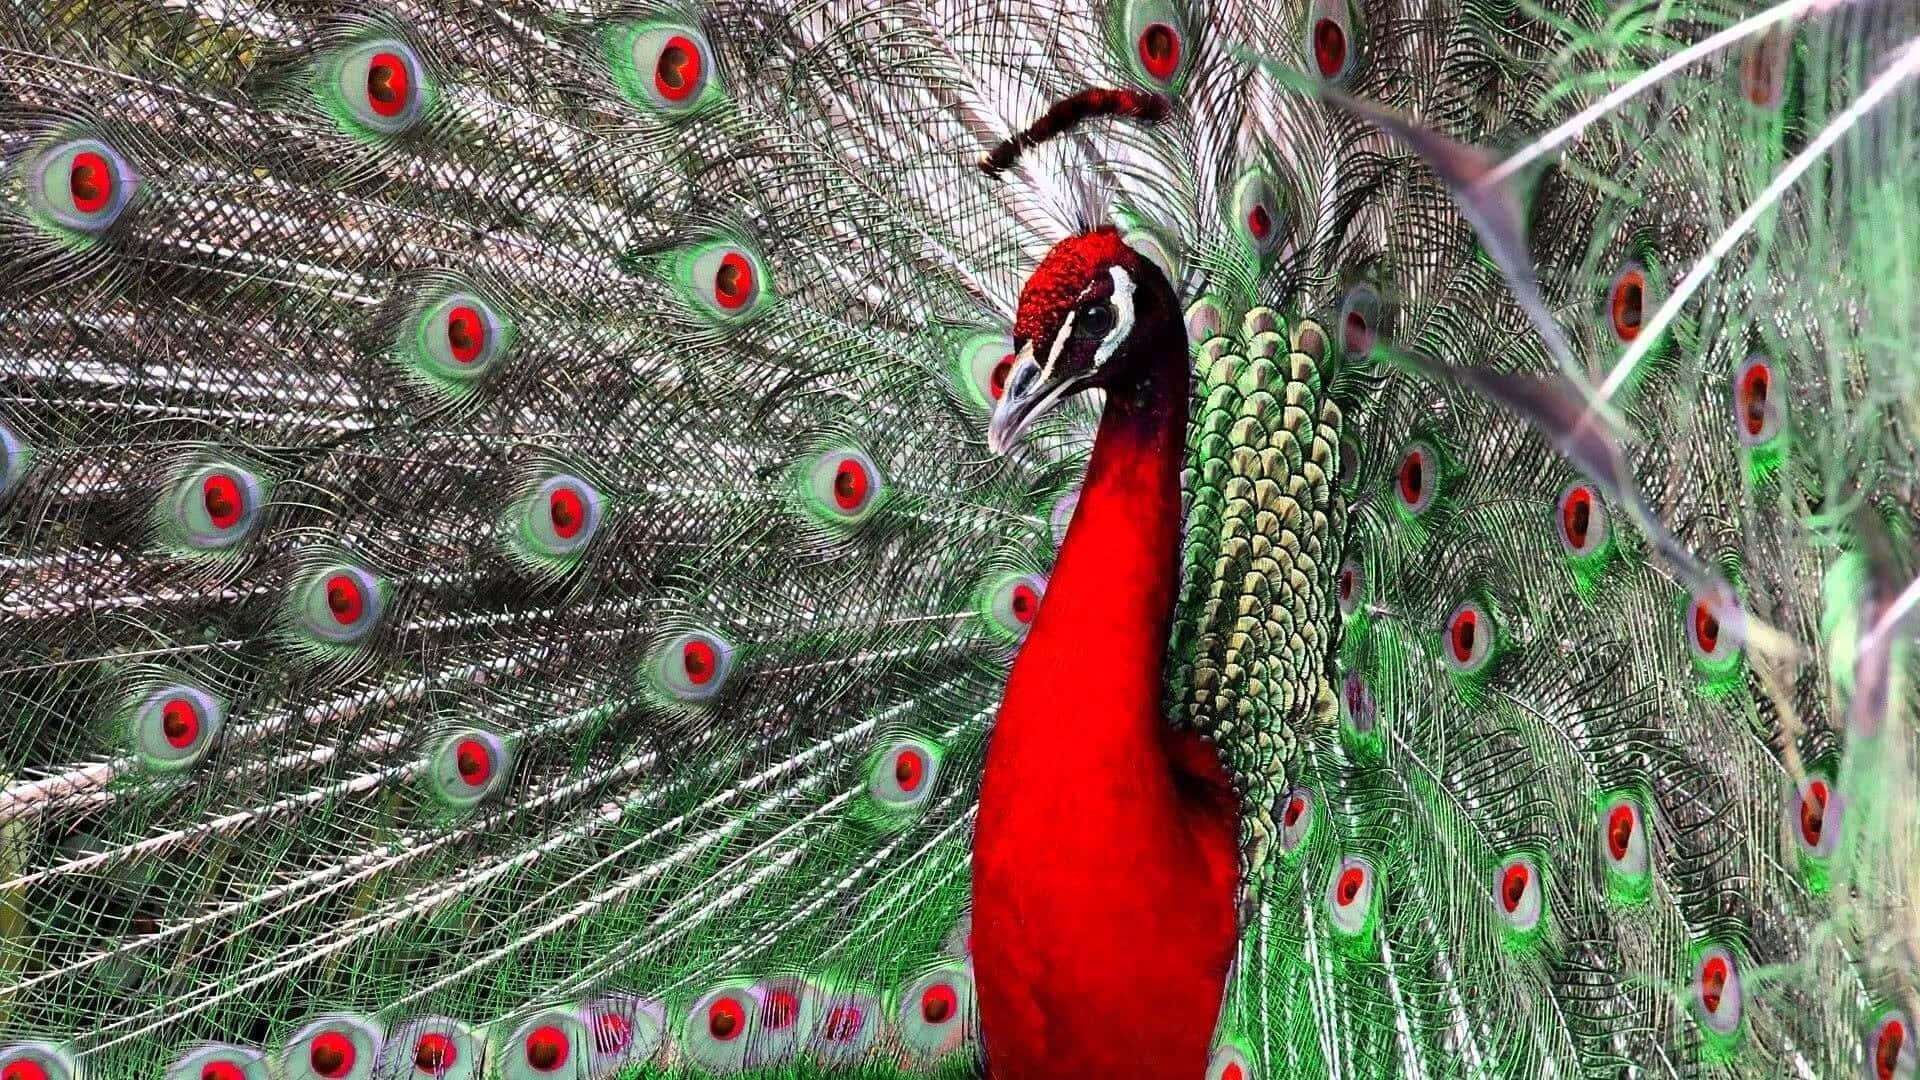 A Peacock With Red Feathers